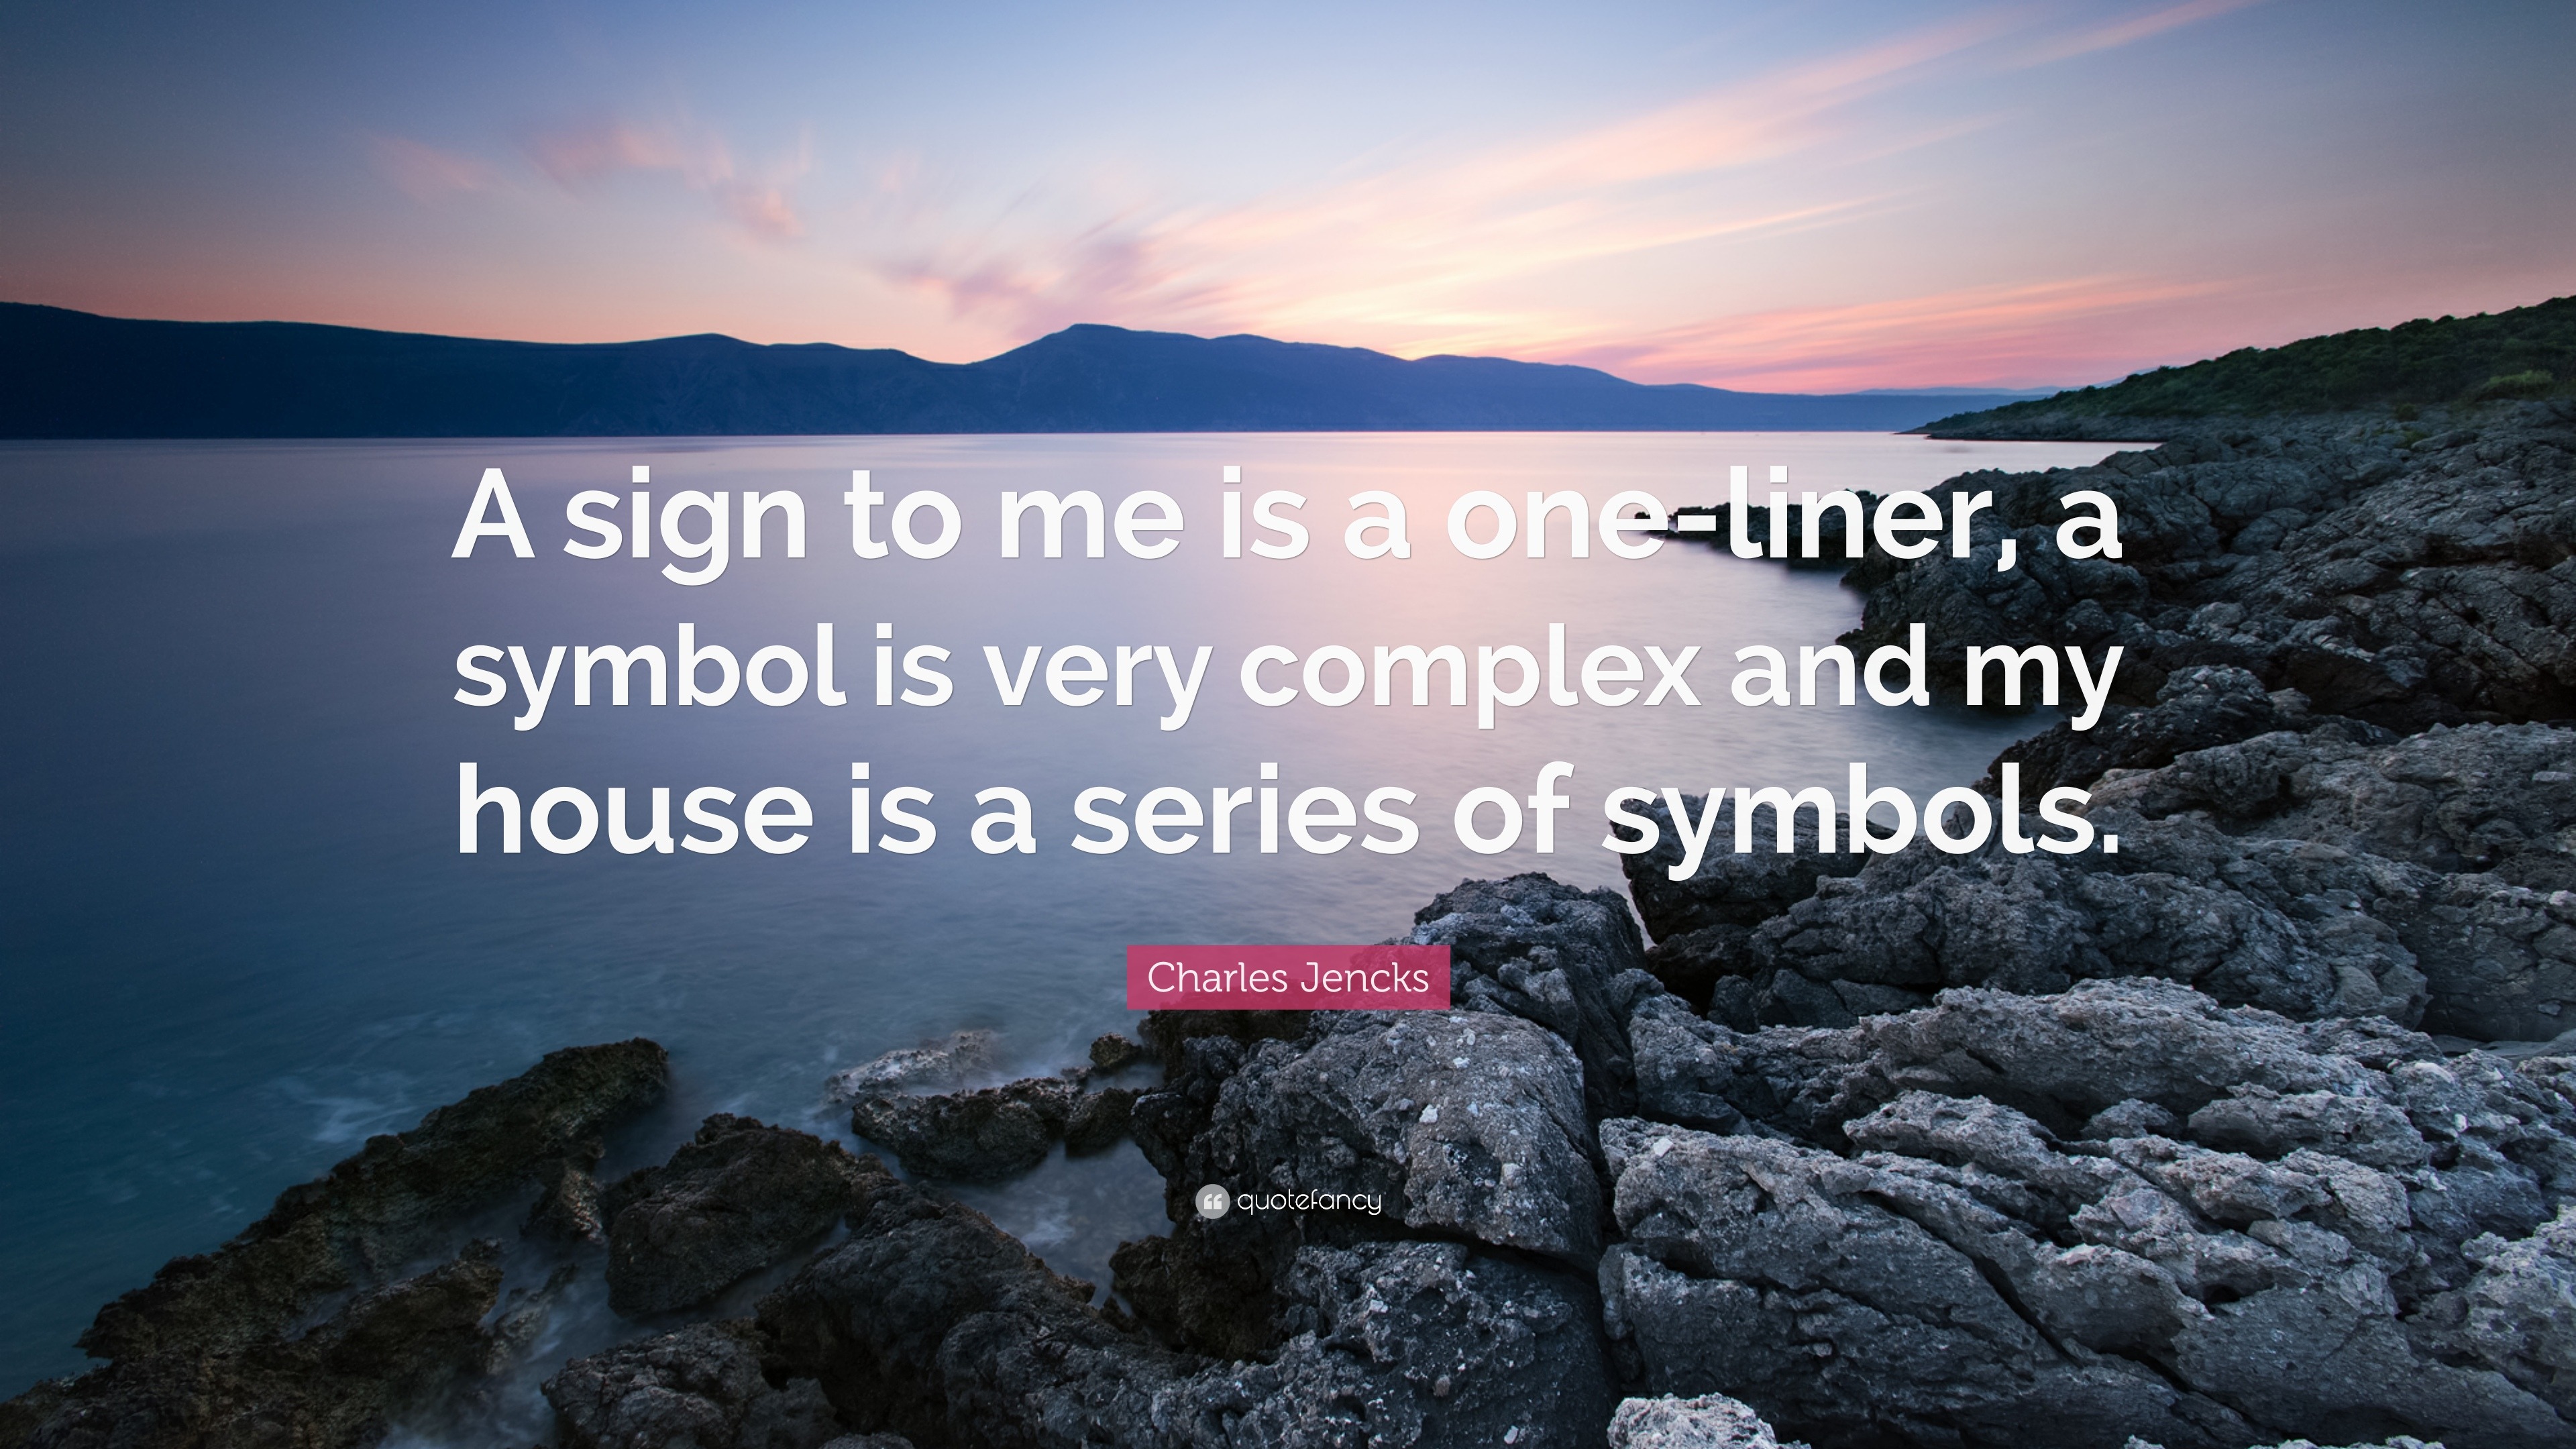 Charles Jencks Quote: “A sign to me is a one-liner, a symbol is